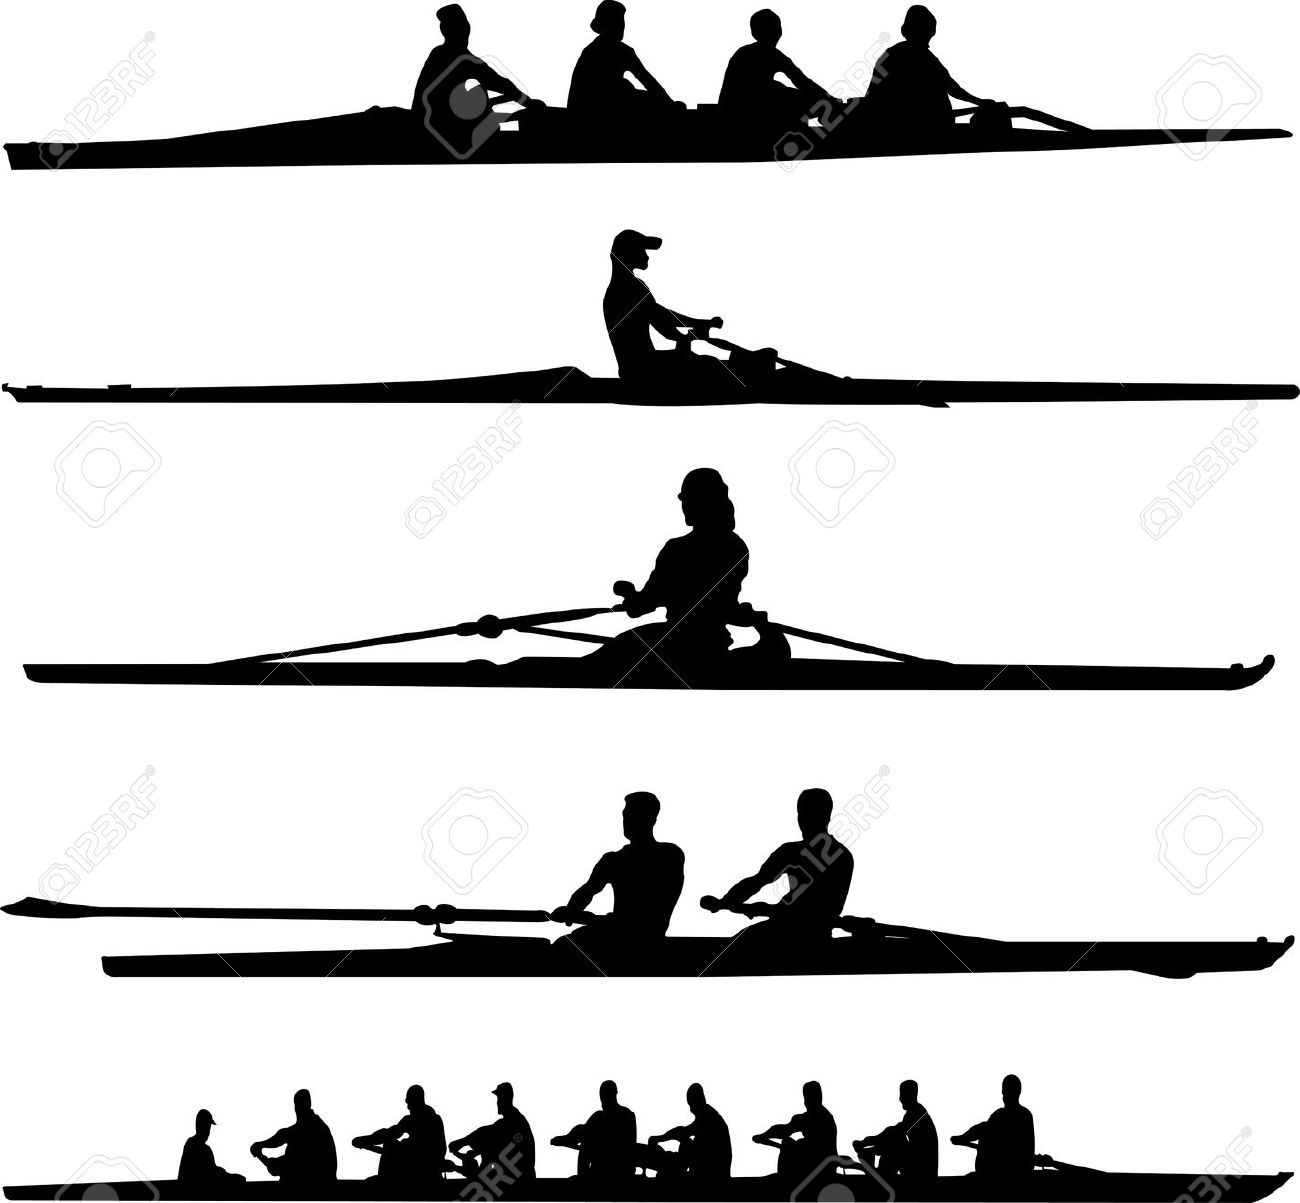 rower - woman Stock Vector - 